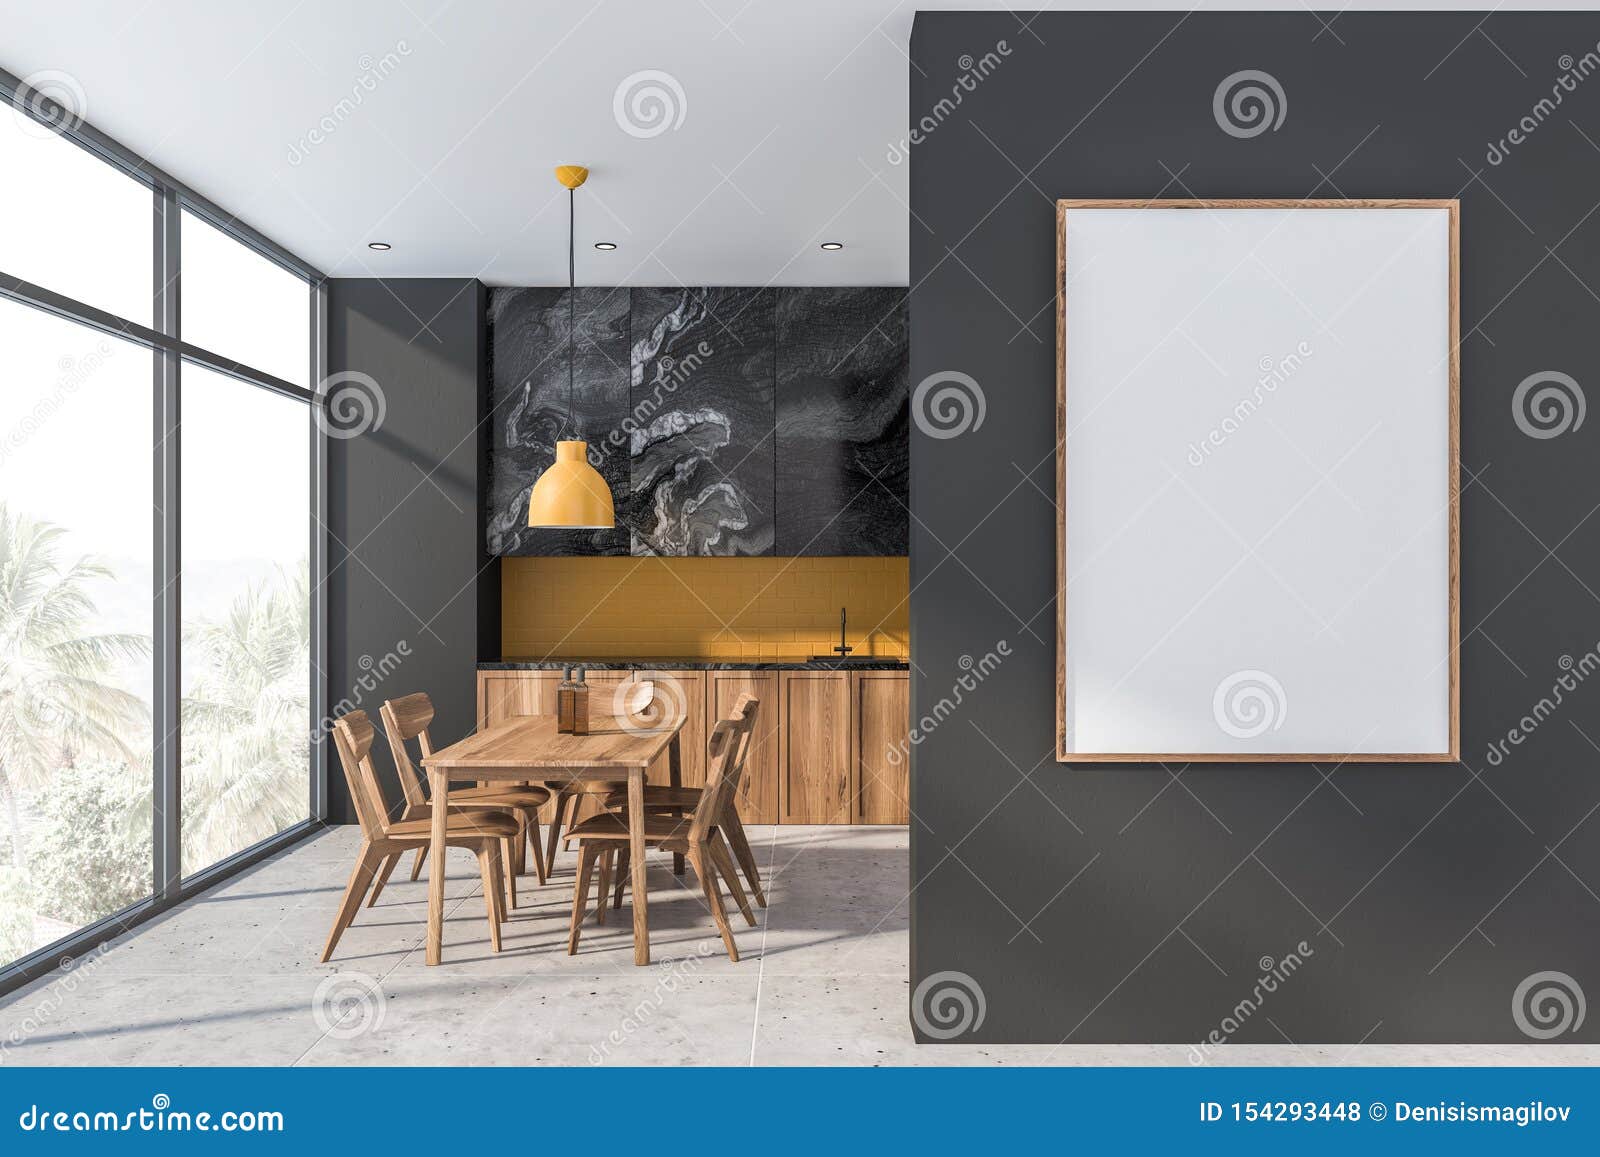 Black Marble And Yellow Kitchen With Poster Stock Illustration